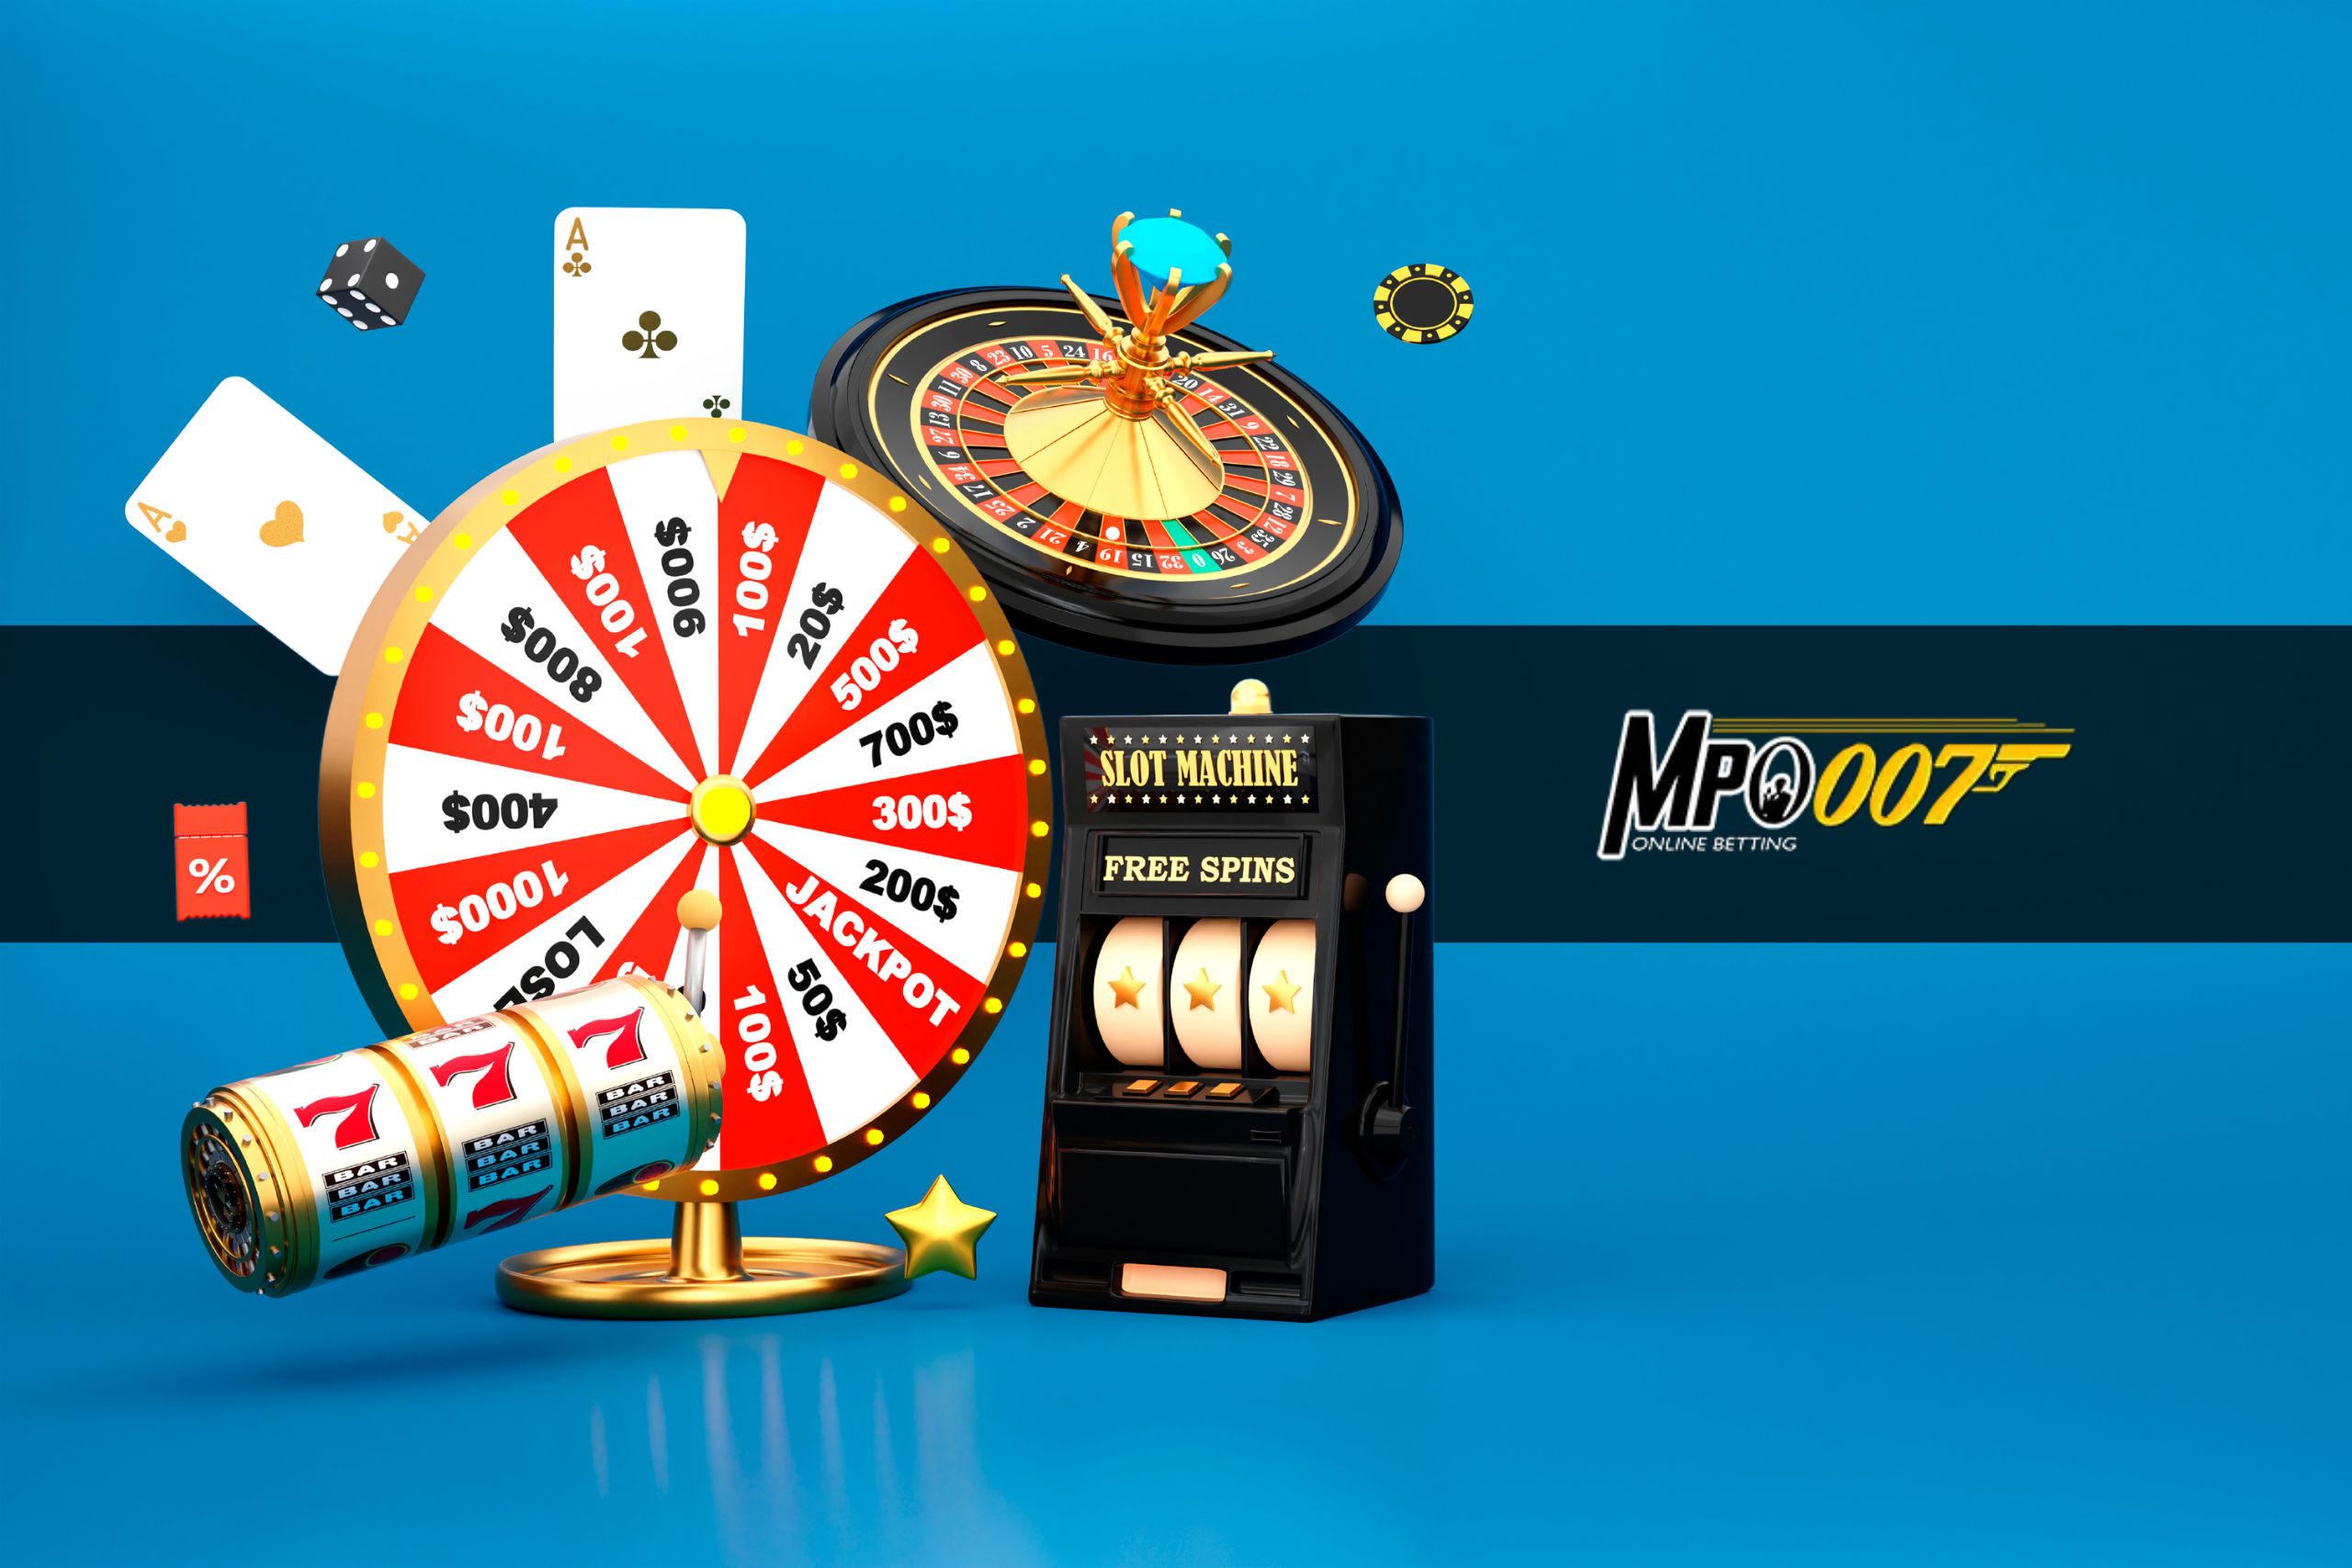 Why MPO007 Is The Most Trusted And Slot Online Casino Website